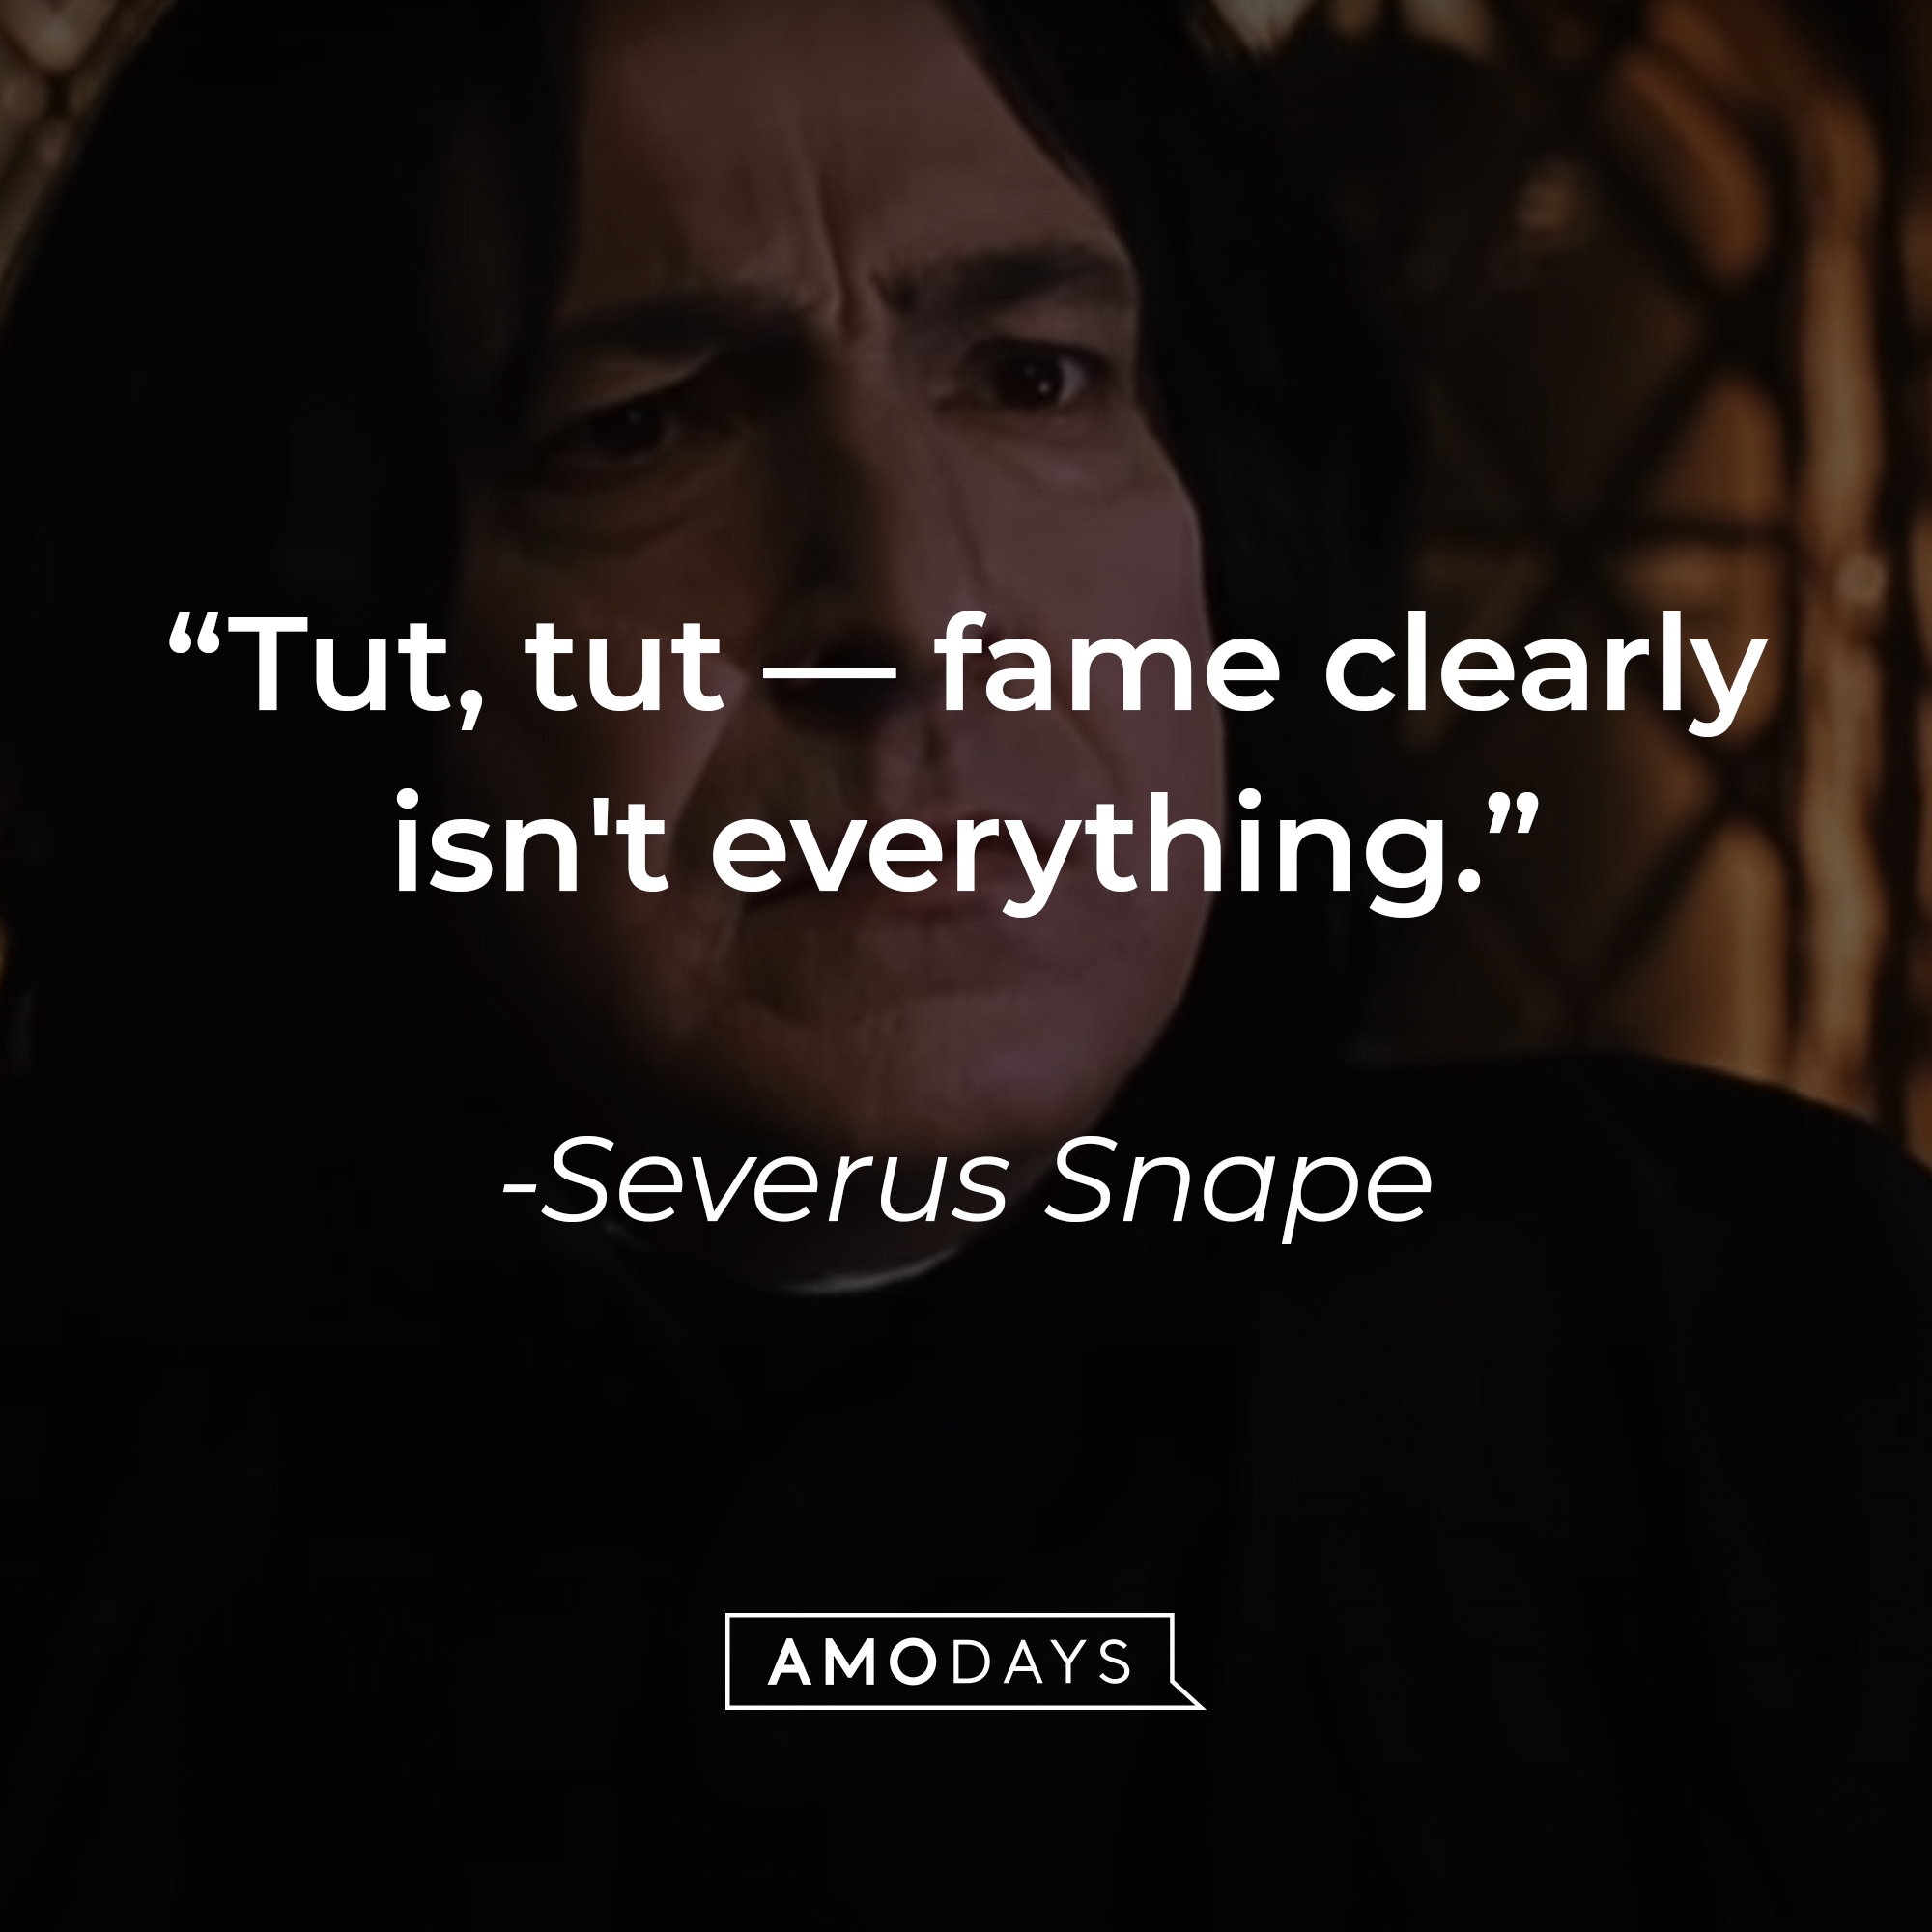 Severus Snape's quote: "Tut, tut — fame clearly isn't everything." | Source: YouTube/harrypotter